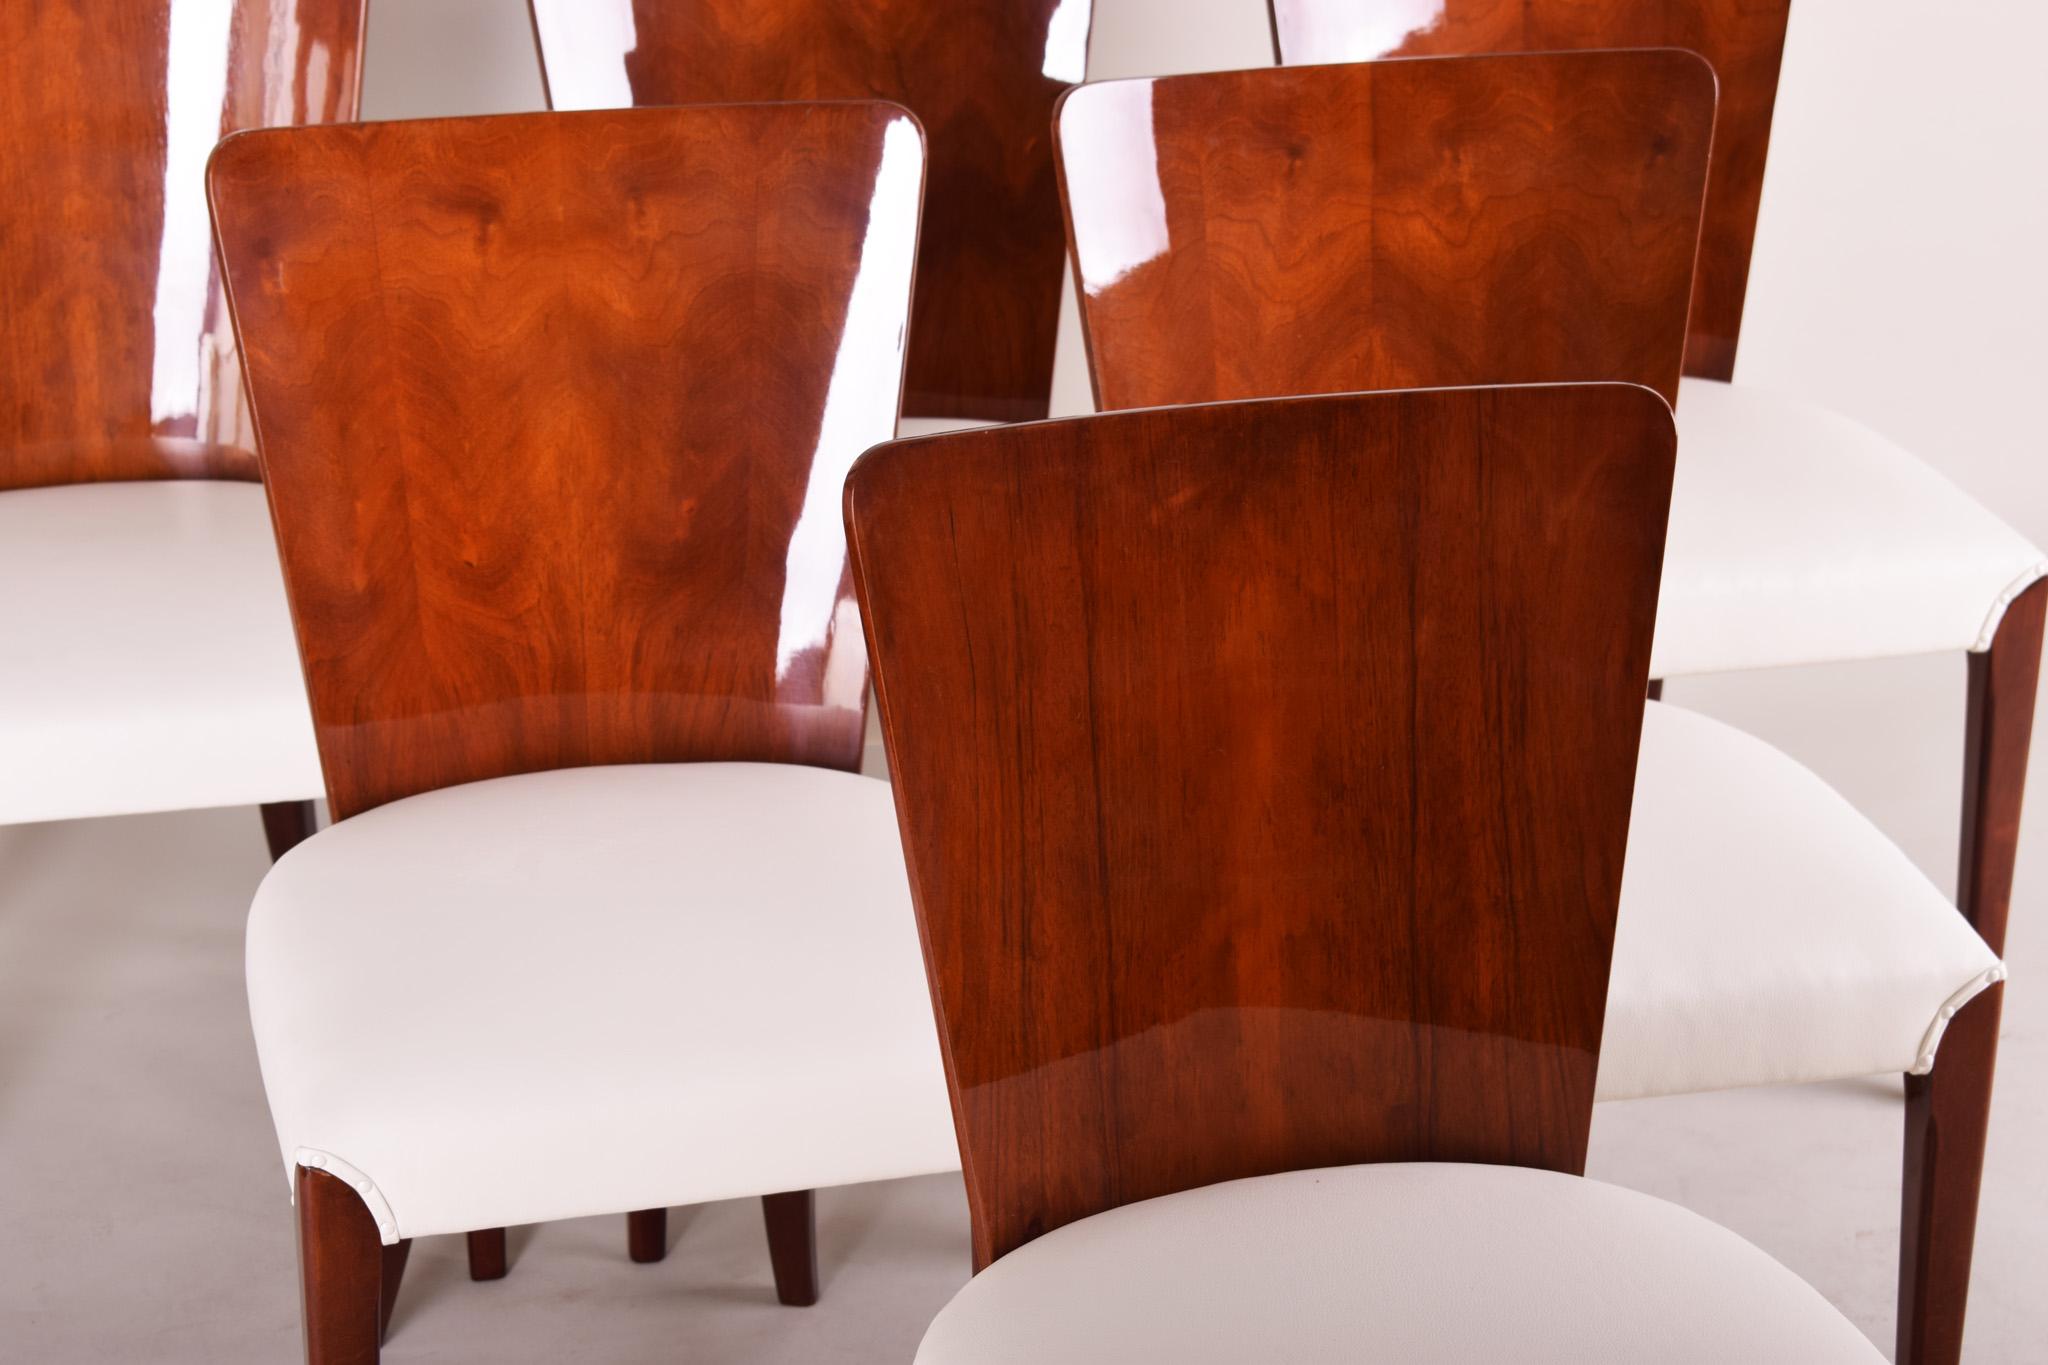 Czech Art Deco chairs, six pieces.
Material: Mahogany
Period: 1940-1949
Completely restored, surface made by piano lacquers to the high gloss. New upholstery.
Made by architect Jindrich Halabala in United Arts & Crafts manufacture in Brno.

We